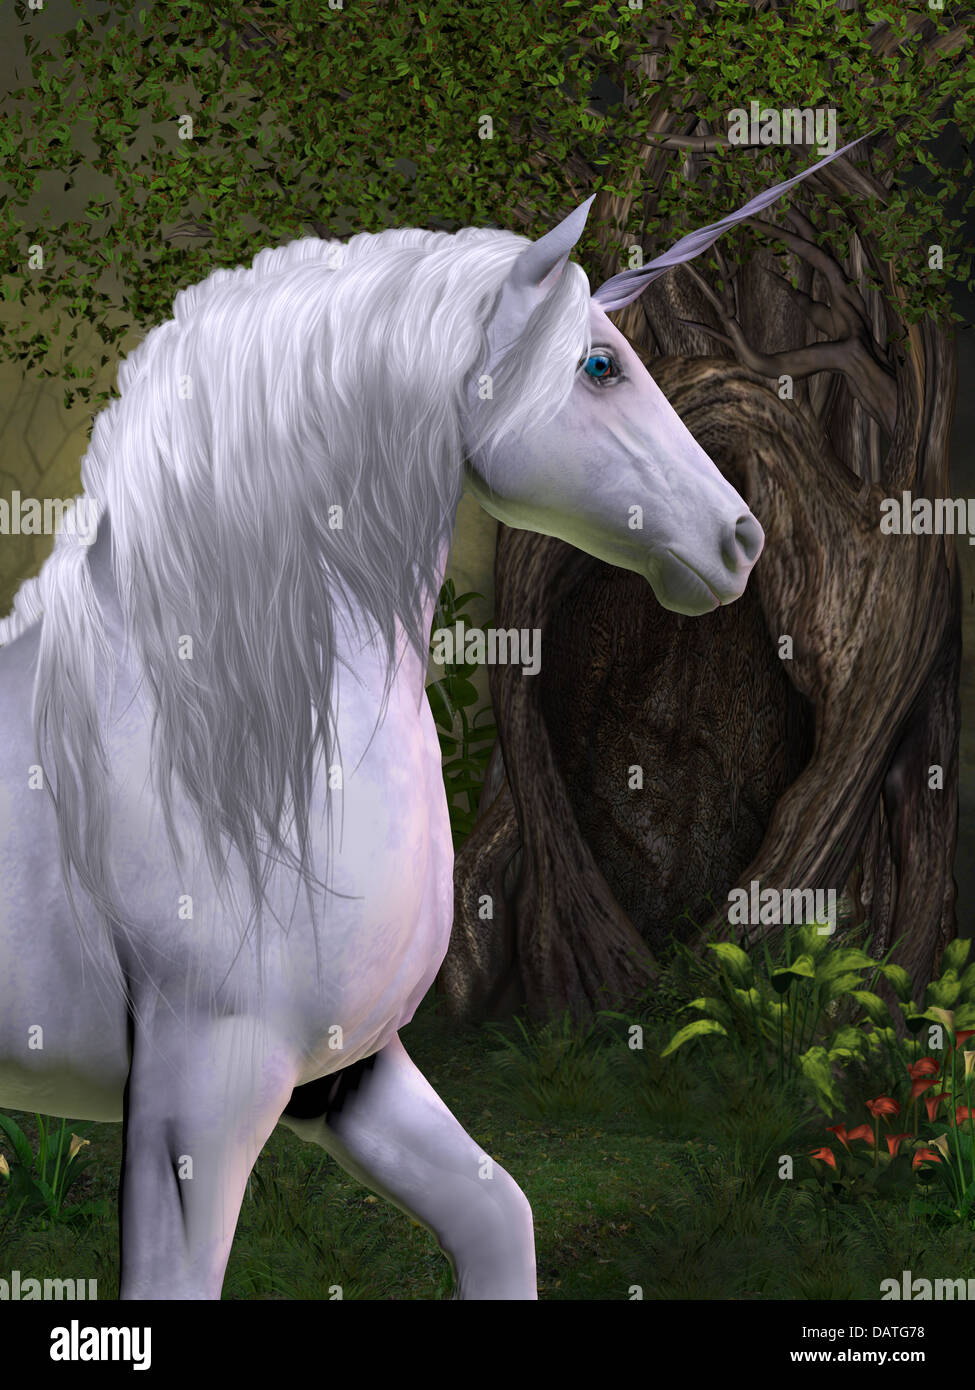 A unicorn buck prances in the magical forest full of beautiful flowers and trees. Stock Photo